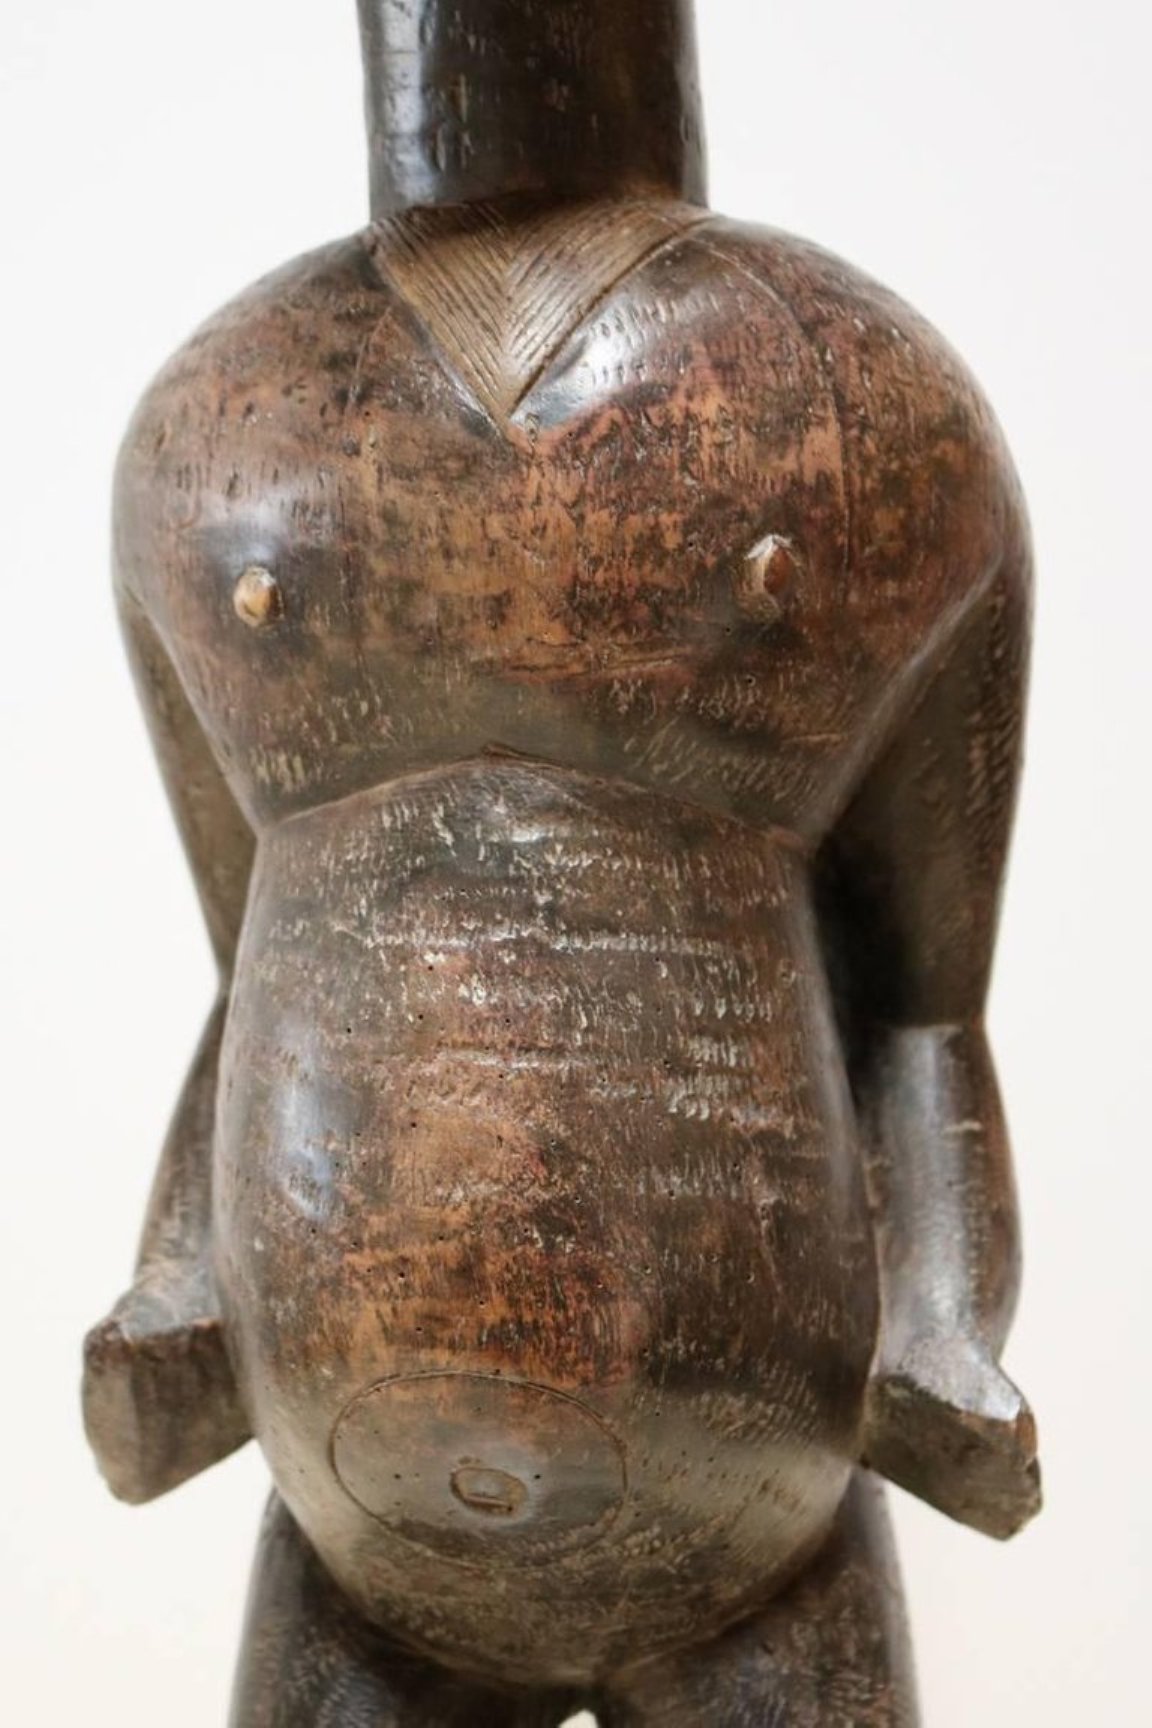 "Fertility" African Sculpture by the Lobi People